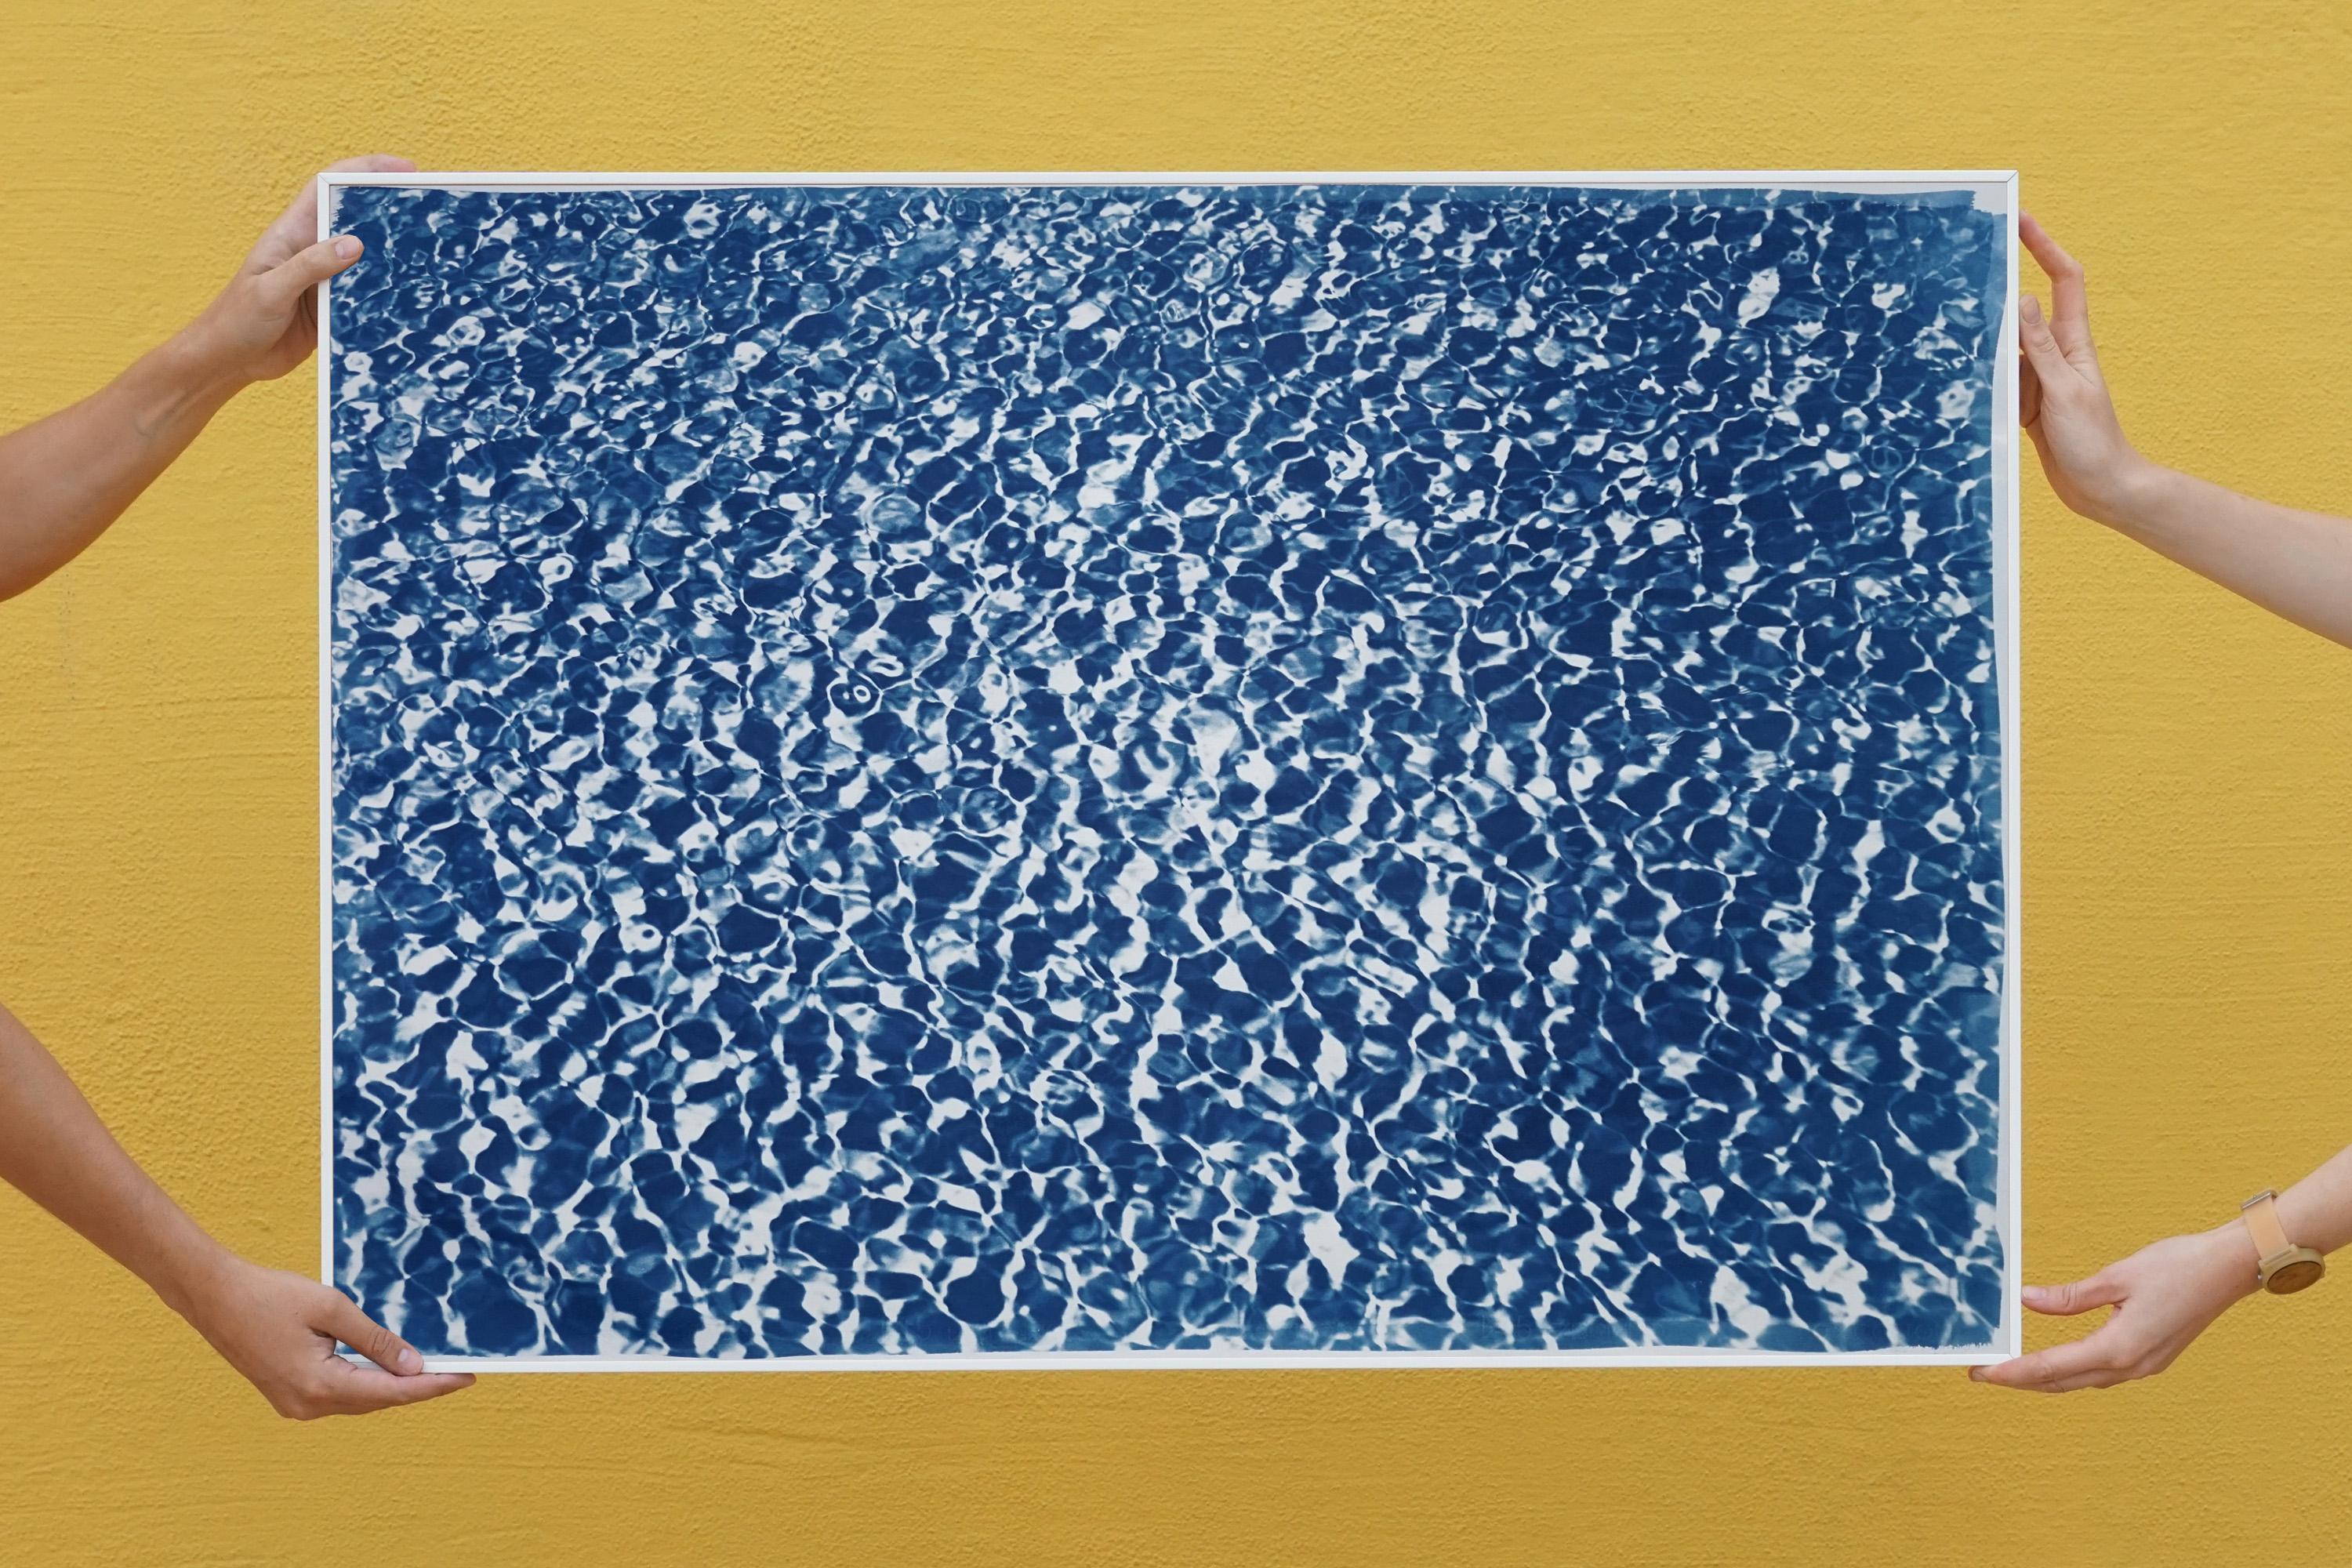 Handmade Cyanotype of Infinity Pool Water Reflecctiona, Blue and White on Paper 3